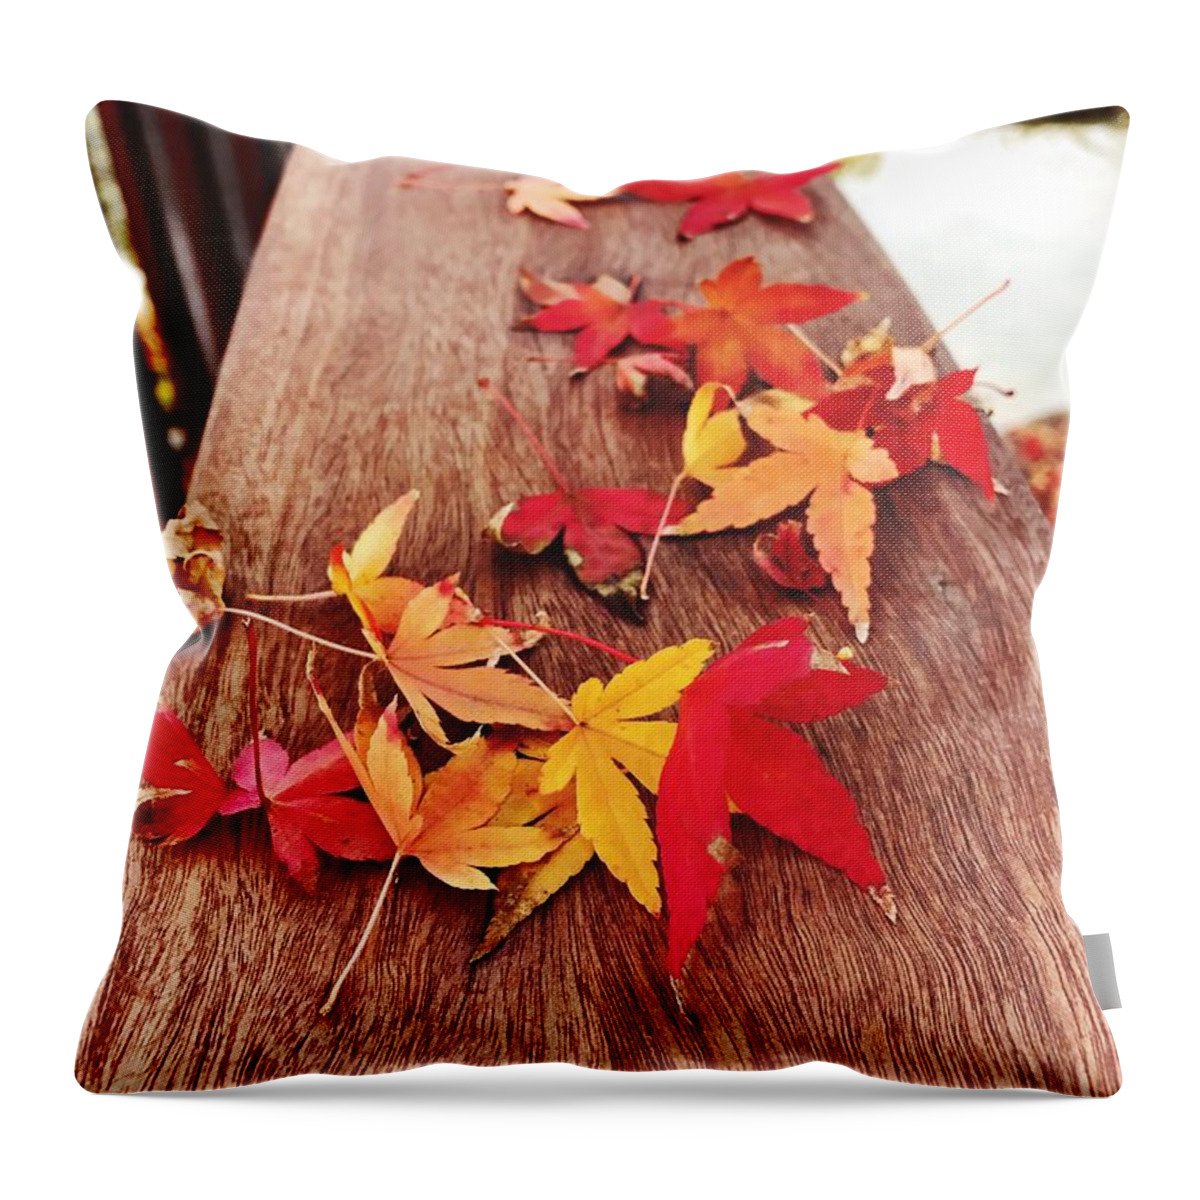 Autumn Throw Pillow featuring the photograph Autumn Gathering by Brad Hodges